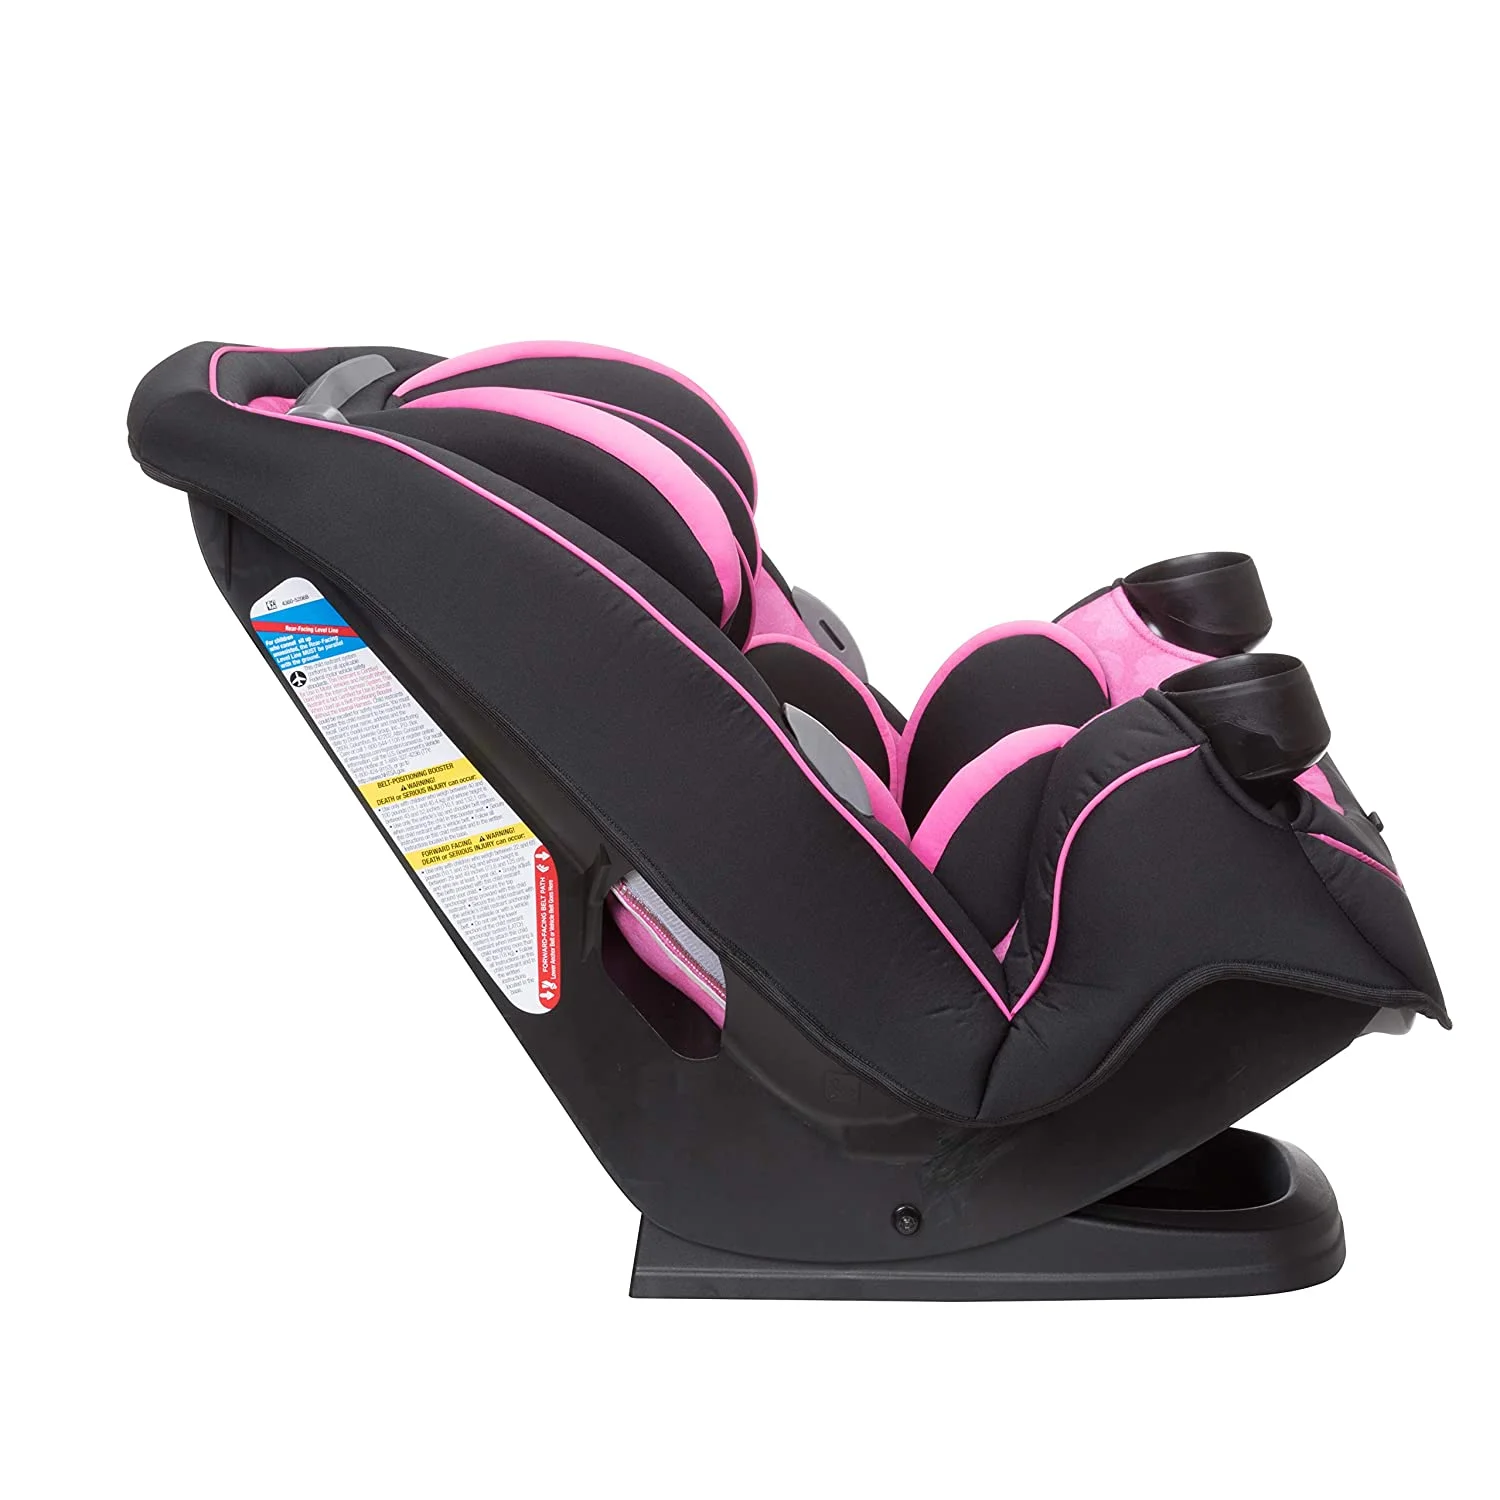 Top 8 Best Forward Facing Car Seats For 2 Years Old Kids